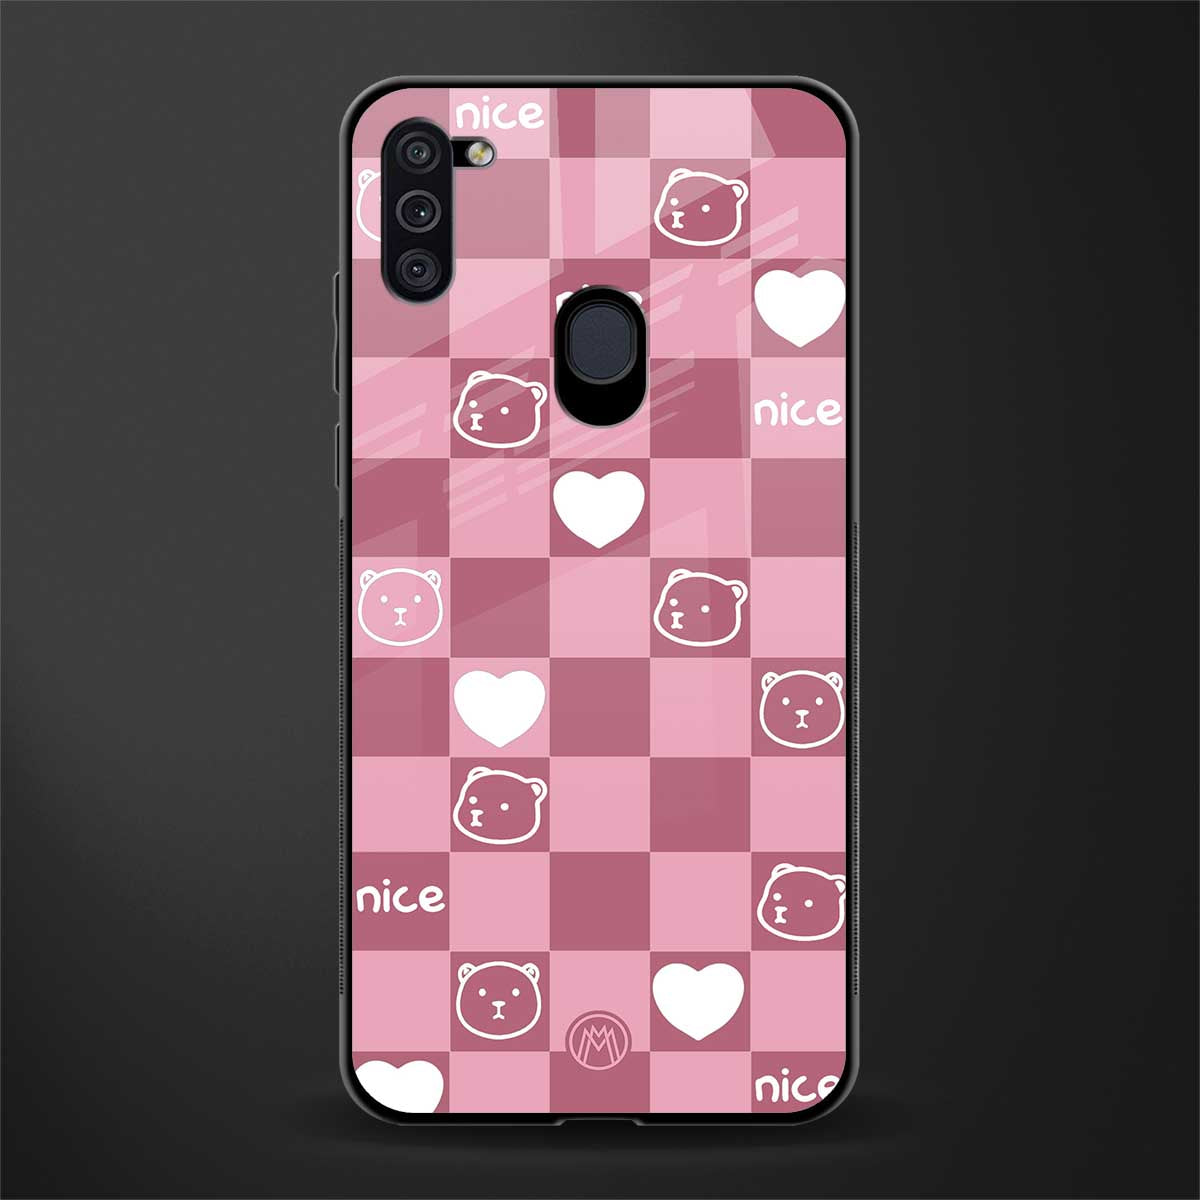 aesthetic bear pattern pink edition glass case for samsung a11 image